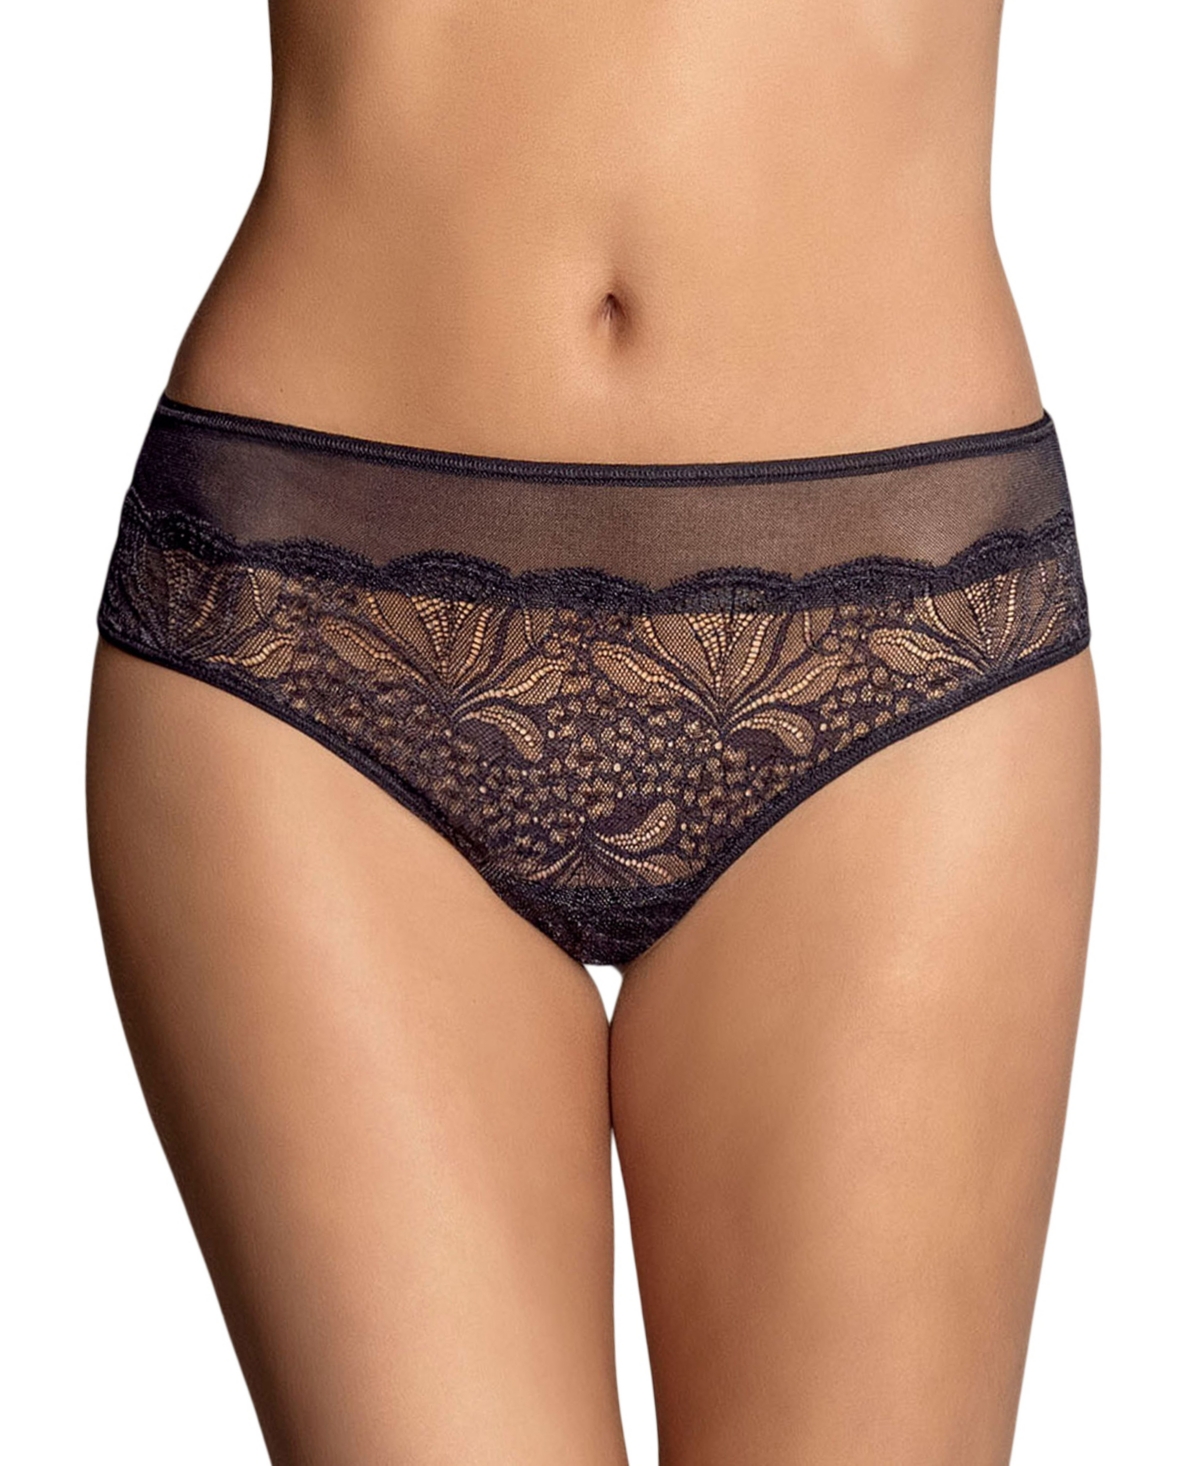 Women's Mid-Rise Sheer Lace Cheeky Panty - Black